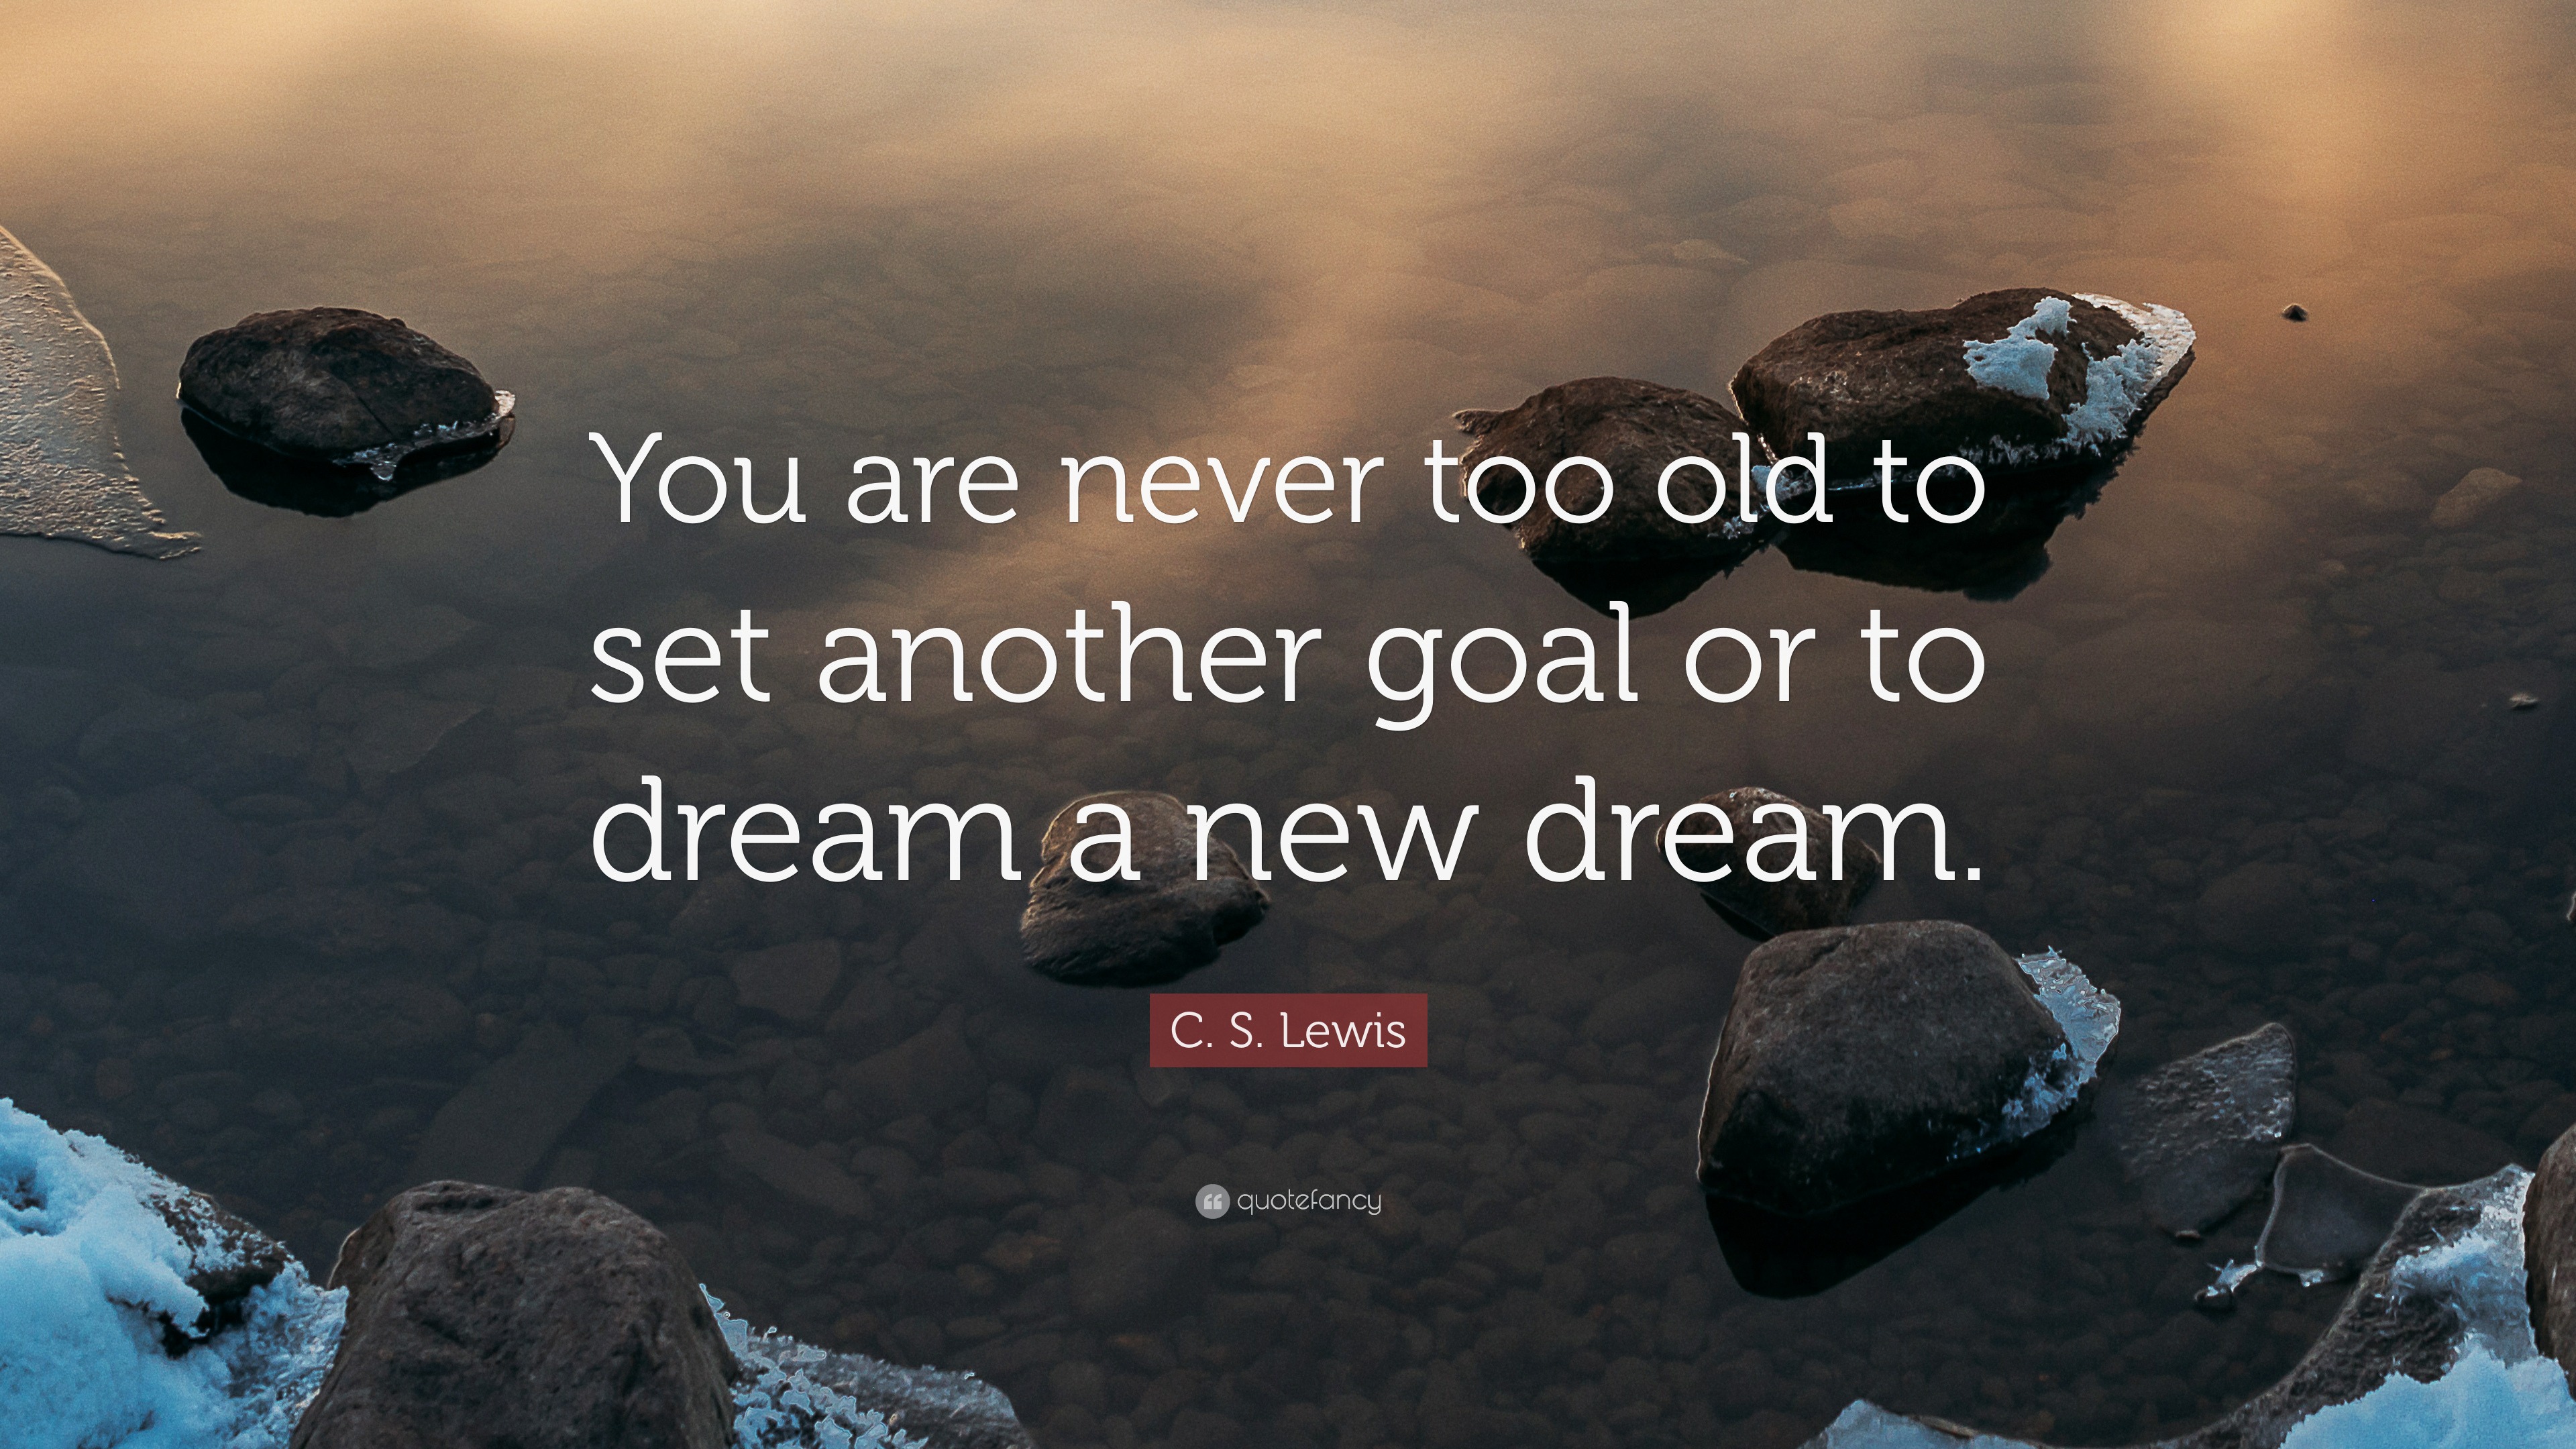 C S Lewis Quote “you Are Never Too Old To Set Another Goal Or To Dream A New Dream”